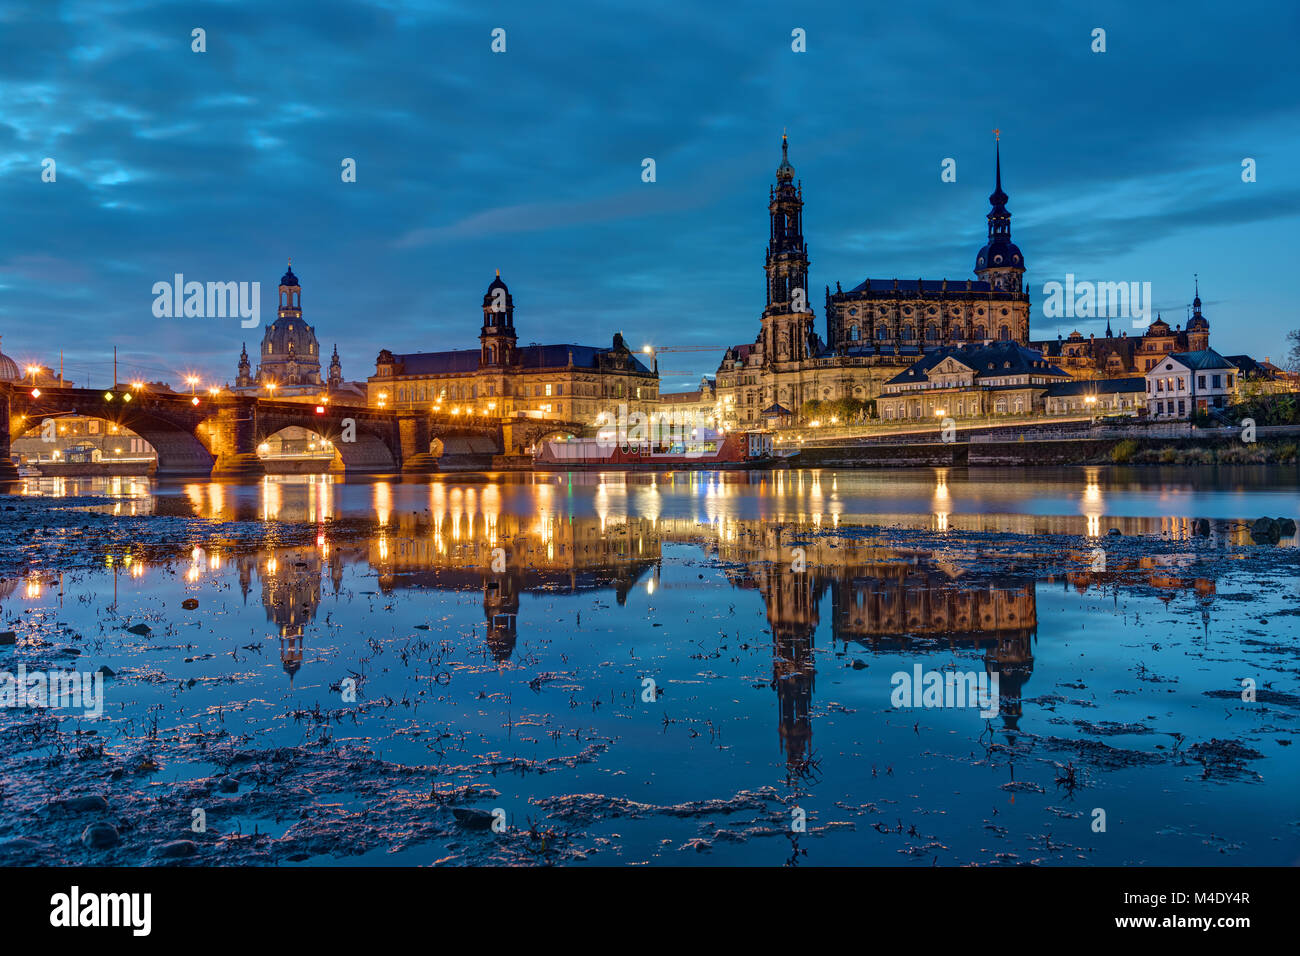 The landmarks of Dresden with the river Elbe at night Stock Photo